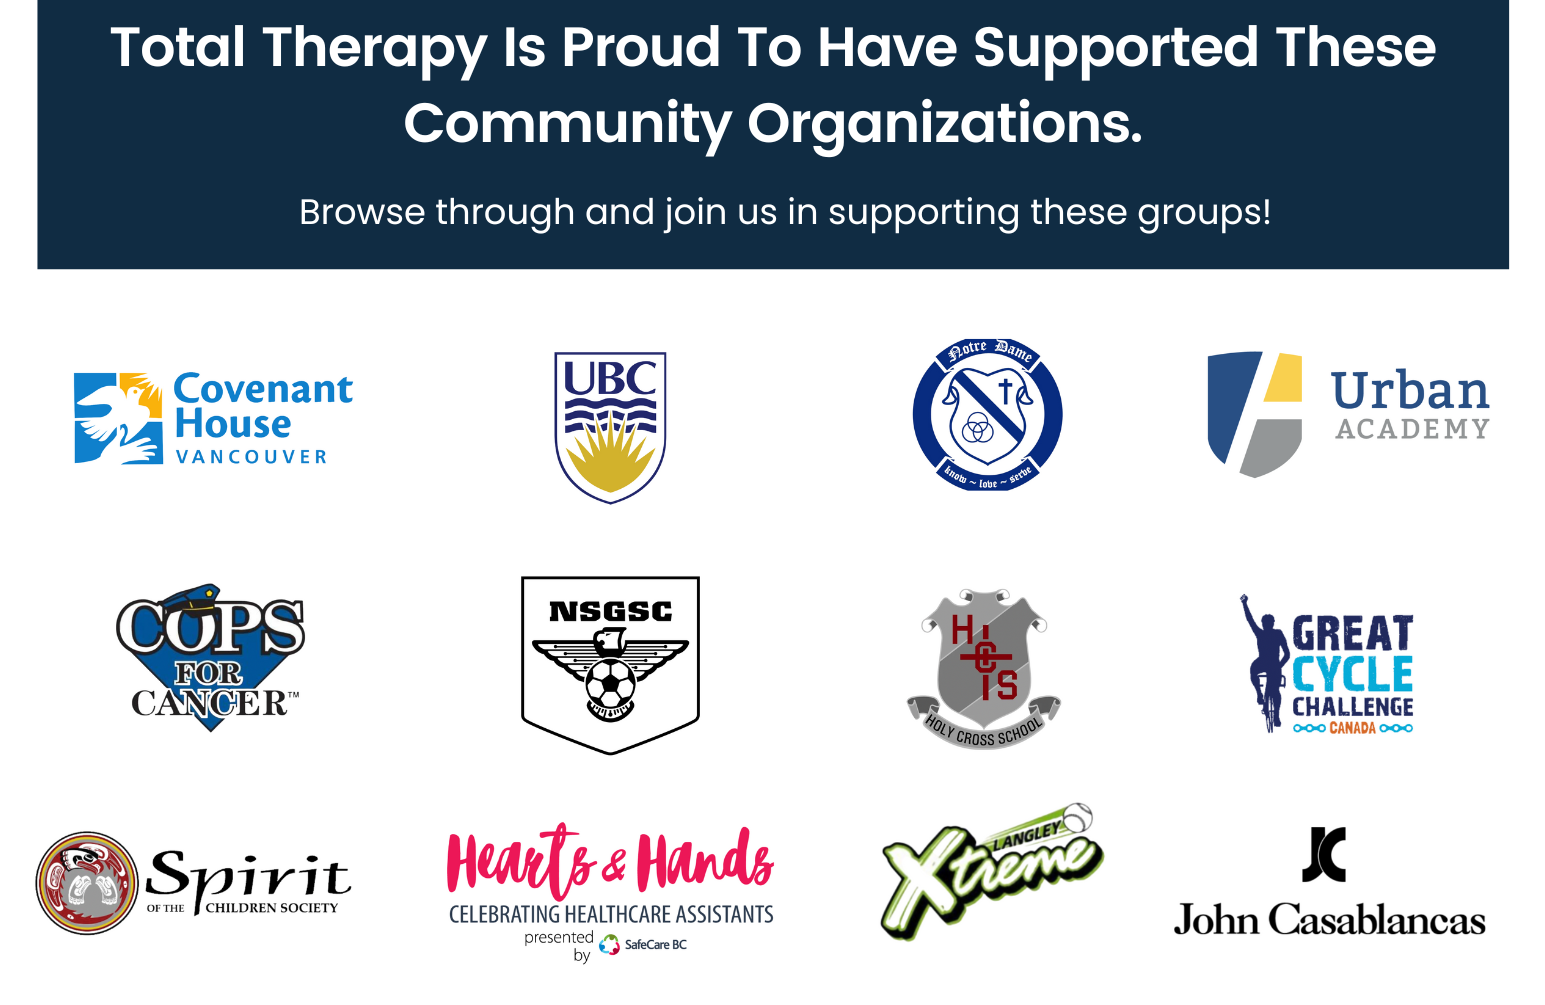 Total Therapy Is Proud To Have Supported These Community Organizations. Browse through and join us in supporting these groups! Covenant House Vancouver, UBC Dance, COPS for cancer, NSGSC North Shore Girls Soccer Club Spirit of the children society Hearts & Hands SafeCare BC Notre Dame Holy Cross School Langley Xtreme John Casablancas Great Cycle Challenge Canada Urban Academy 